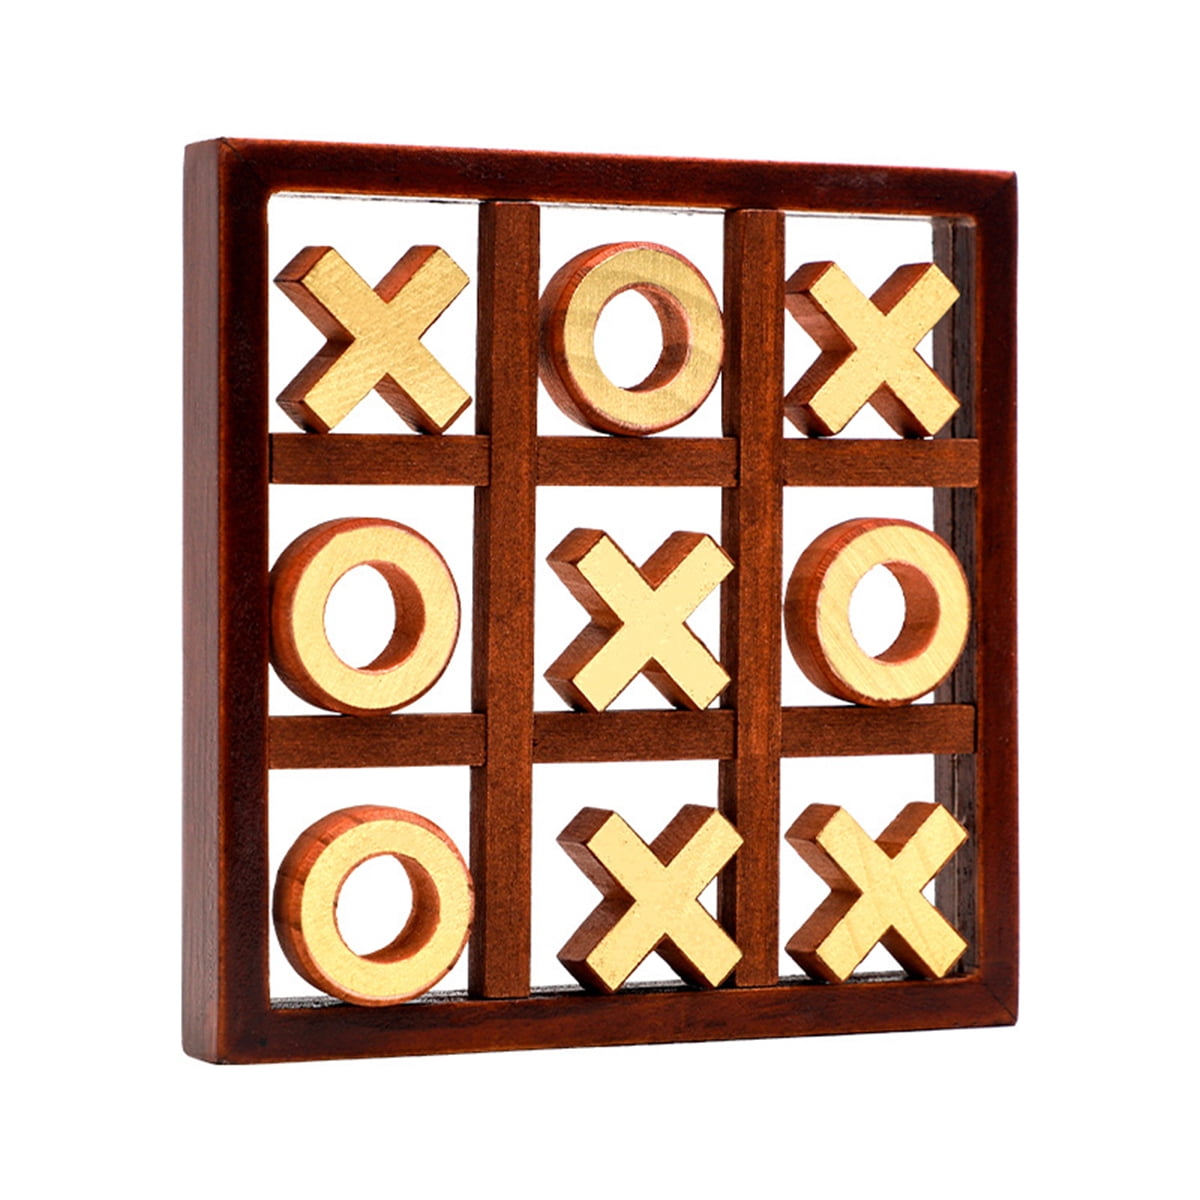 Travel Wooden Tic-Tac-Toe Intelligent Board Game Kids and Adults Puzzle Game 